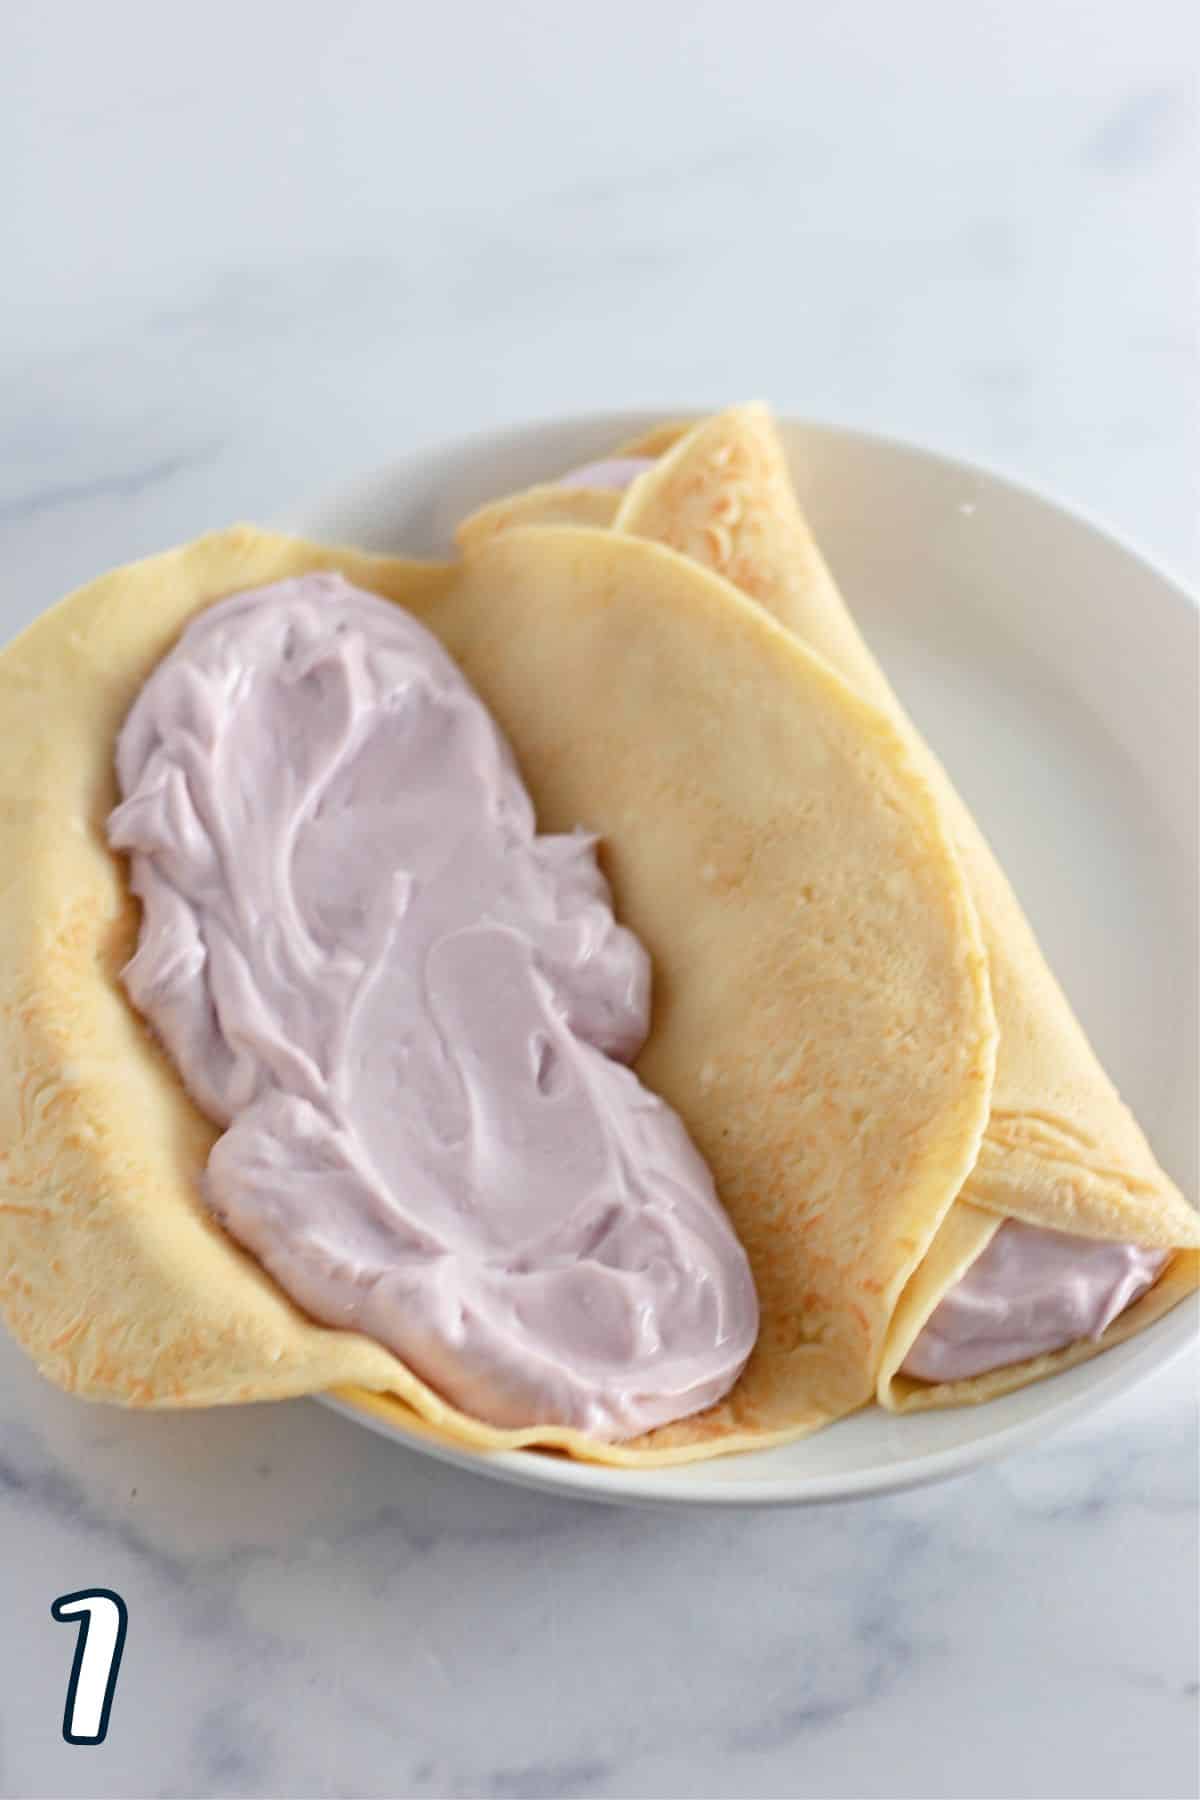 A blueberry cream cheese and yogurt filling spread inside a crepe. 